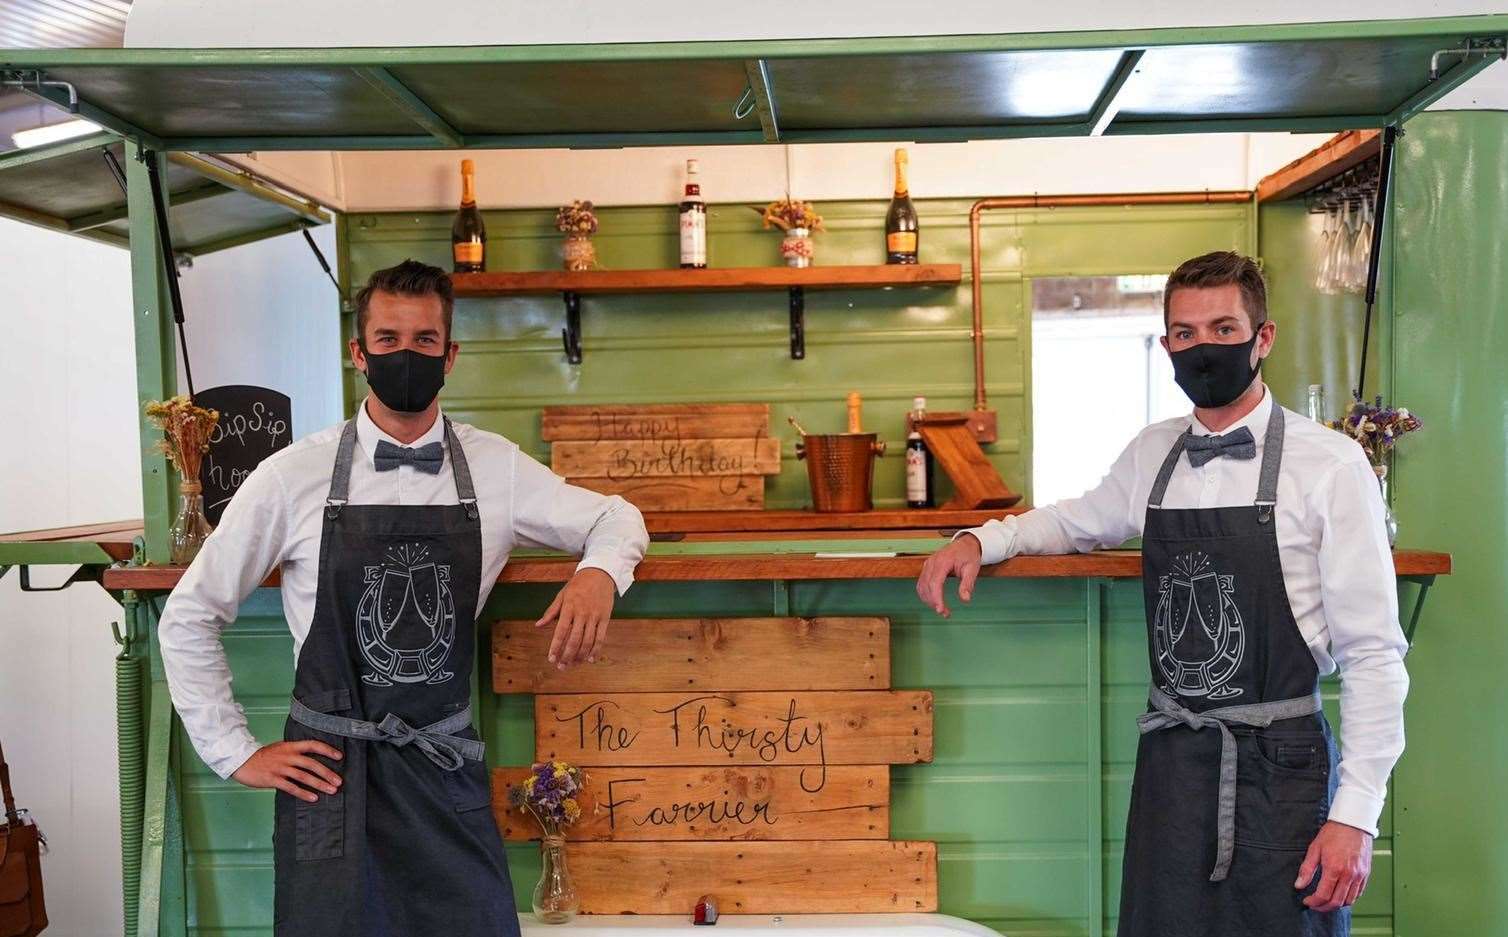 The Thirsty Farrier brothers Dan and Jon are running virtual cocktail masterclasses